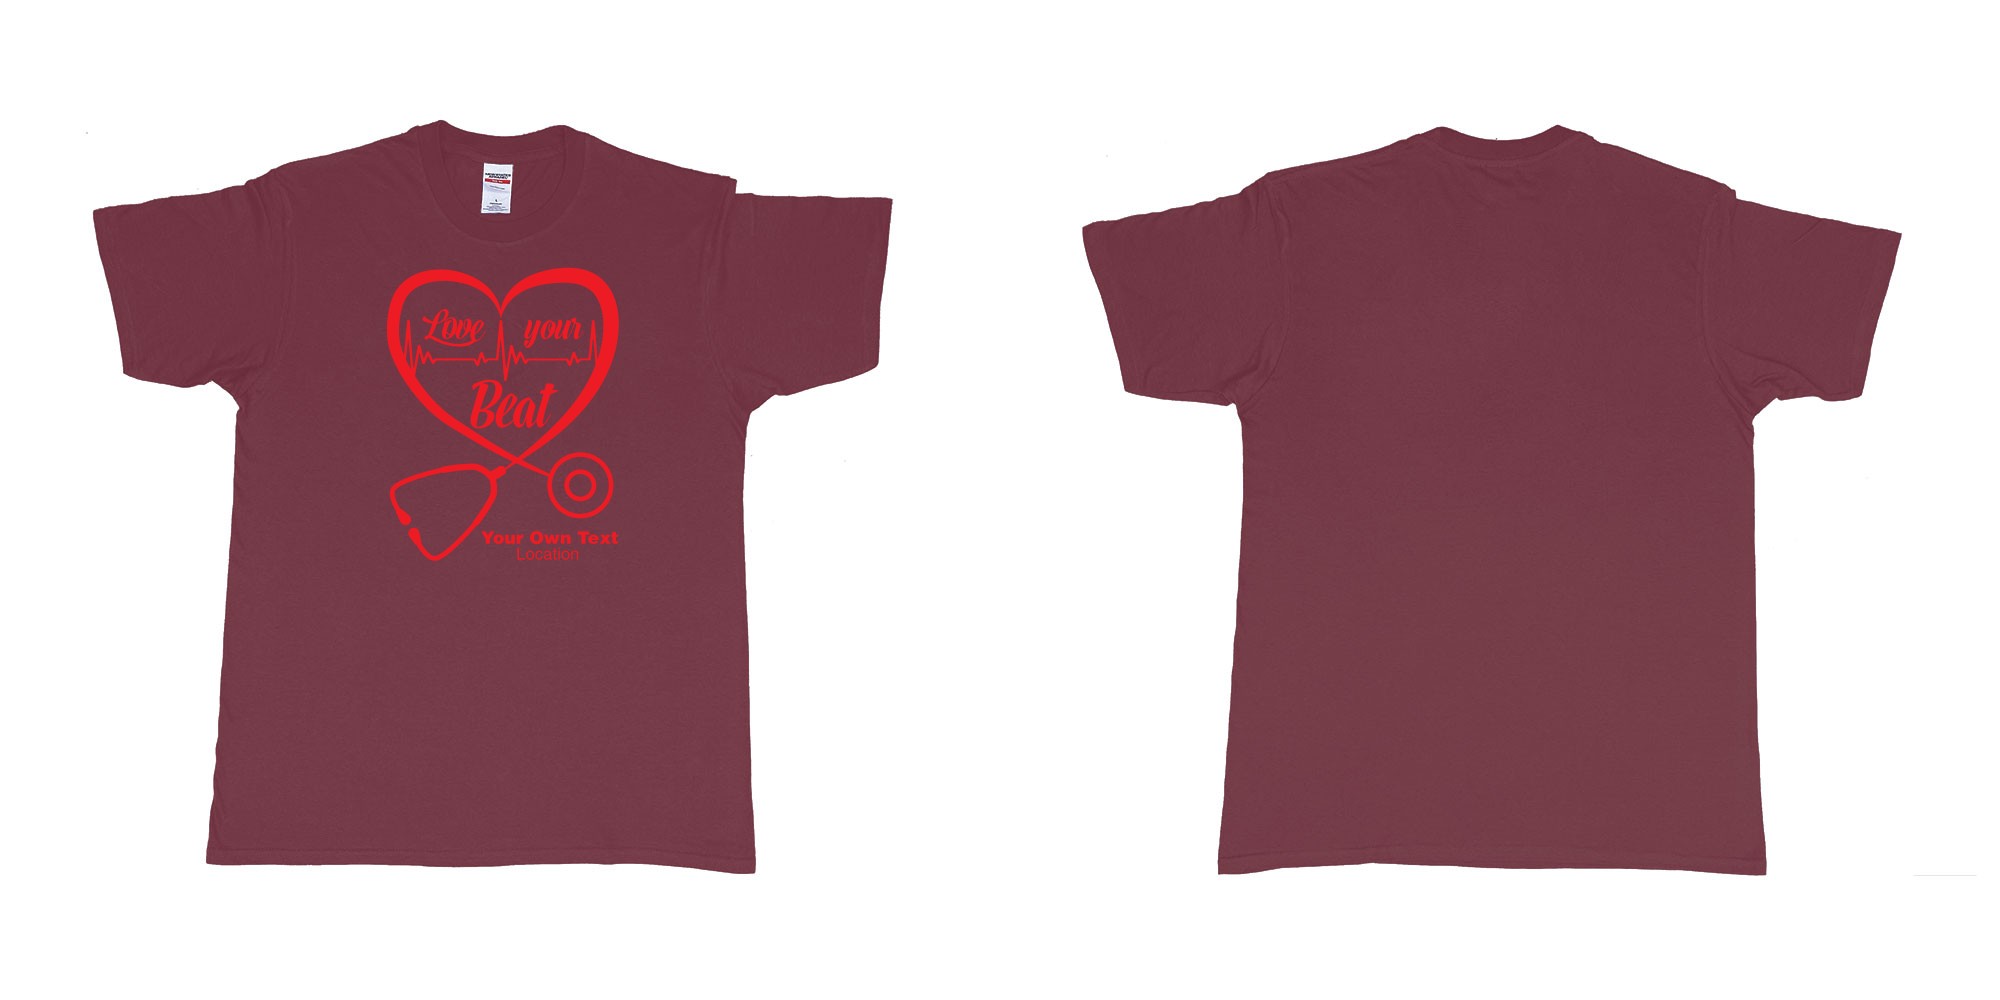 Custom tshirt design stethoscope doctor love your beat hearth custom tshirt print in fabric color marron choice your own text made in Bali by The Pirate Way